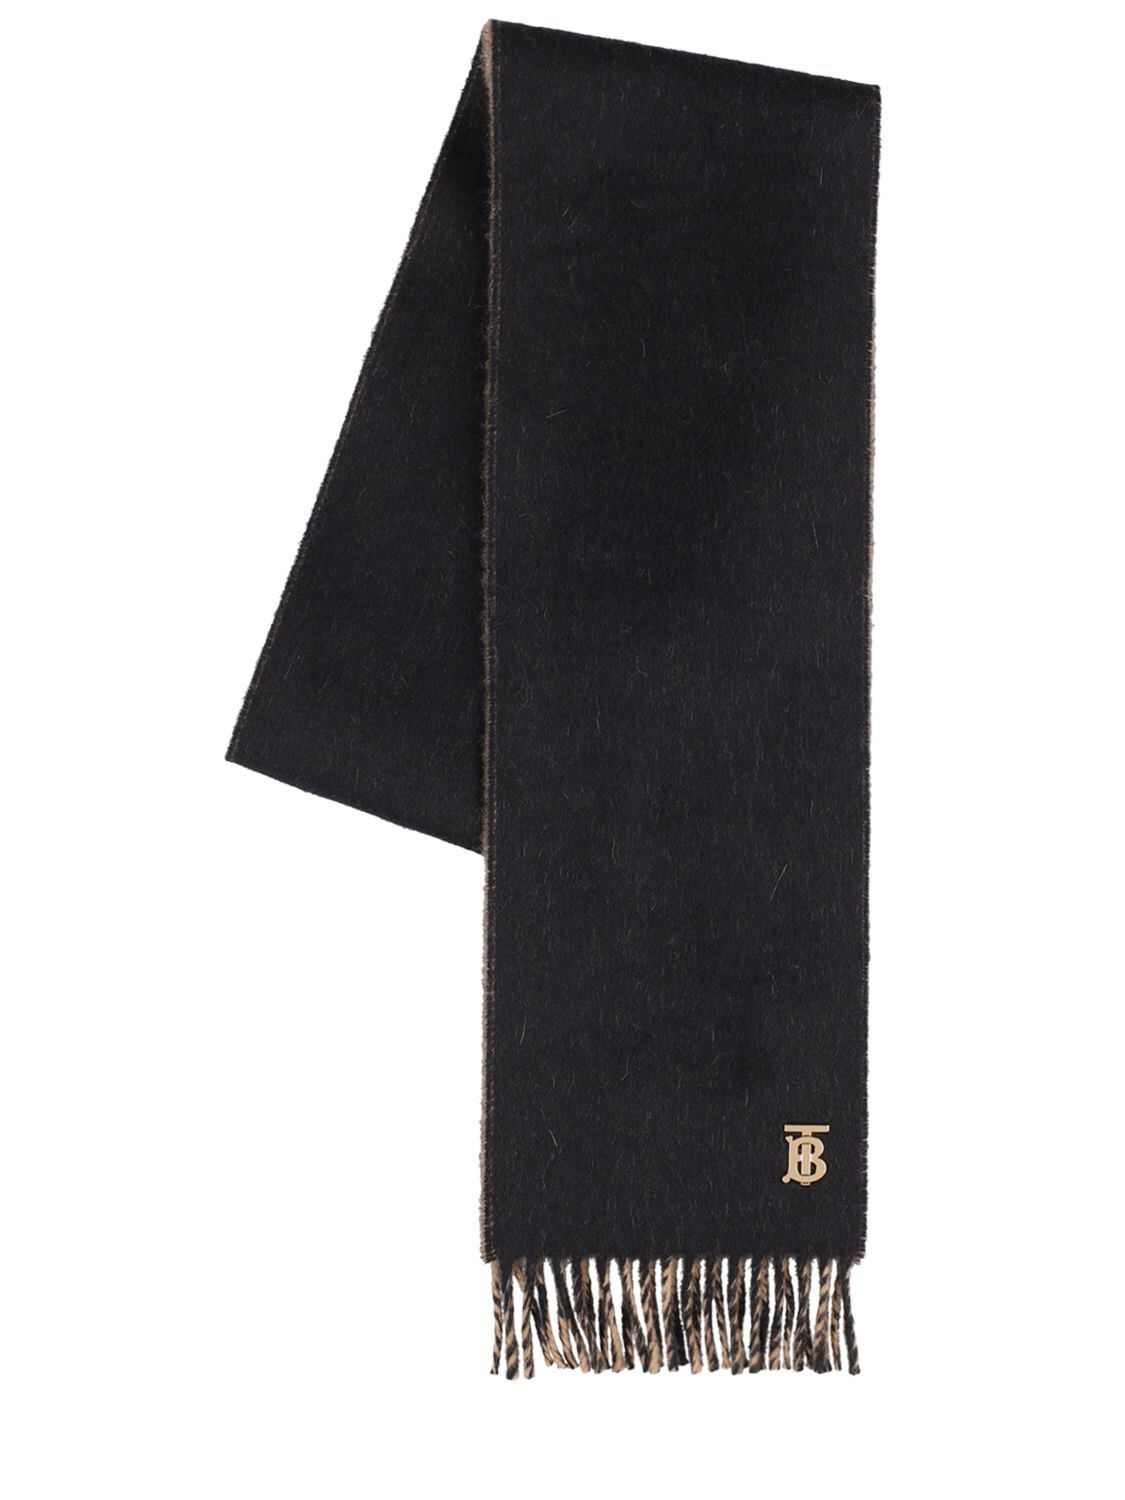 BURBERRY Reversible Solid Cashmere Scarf